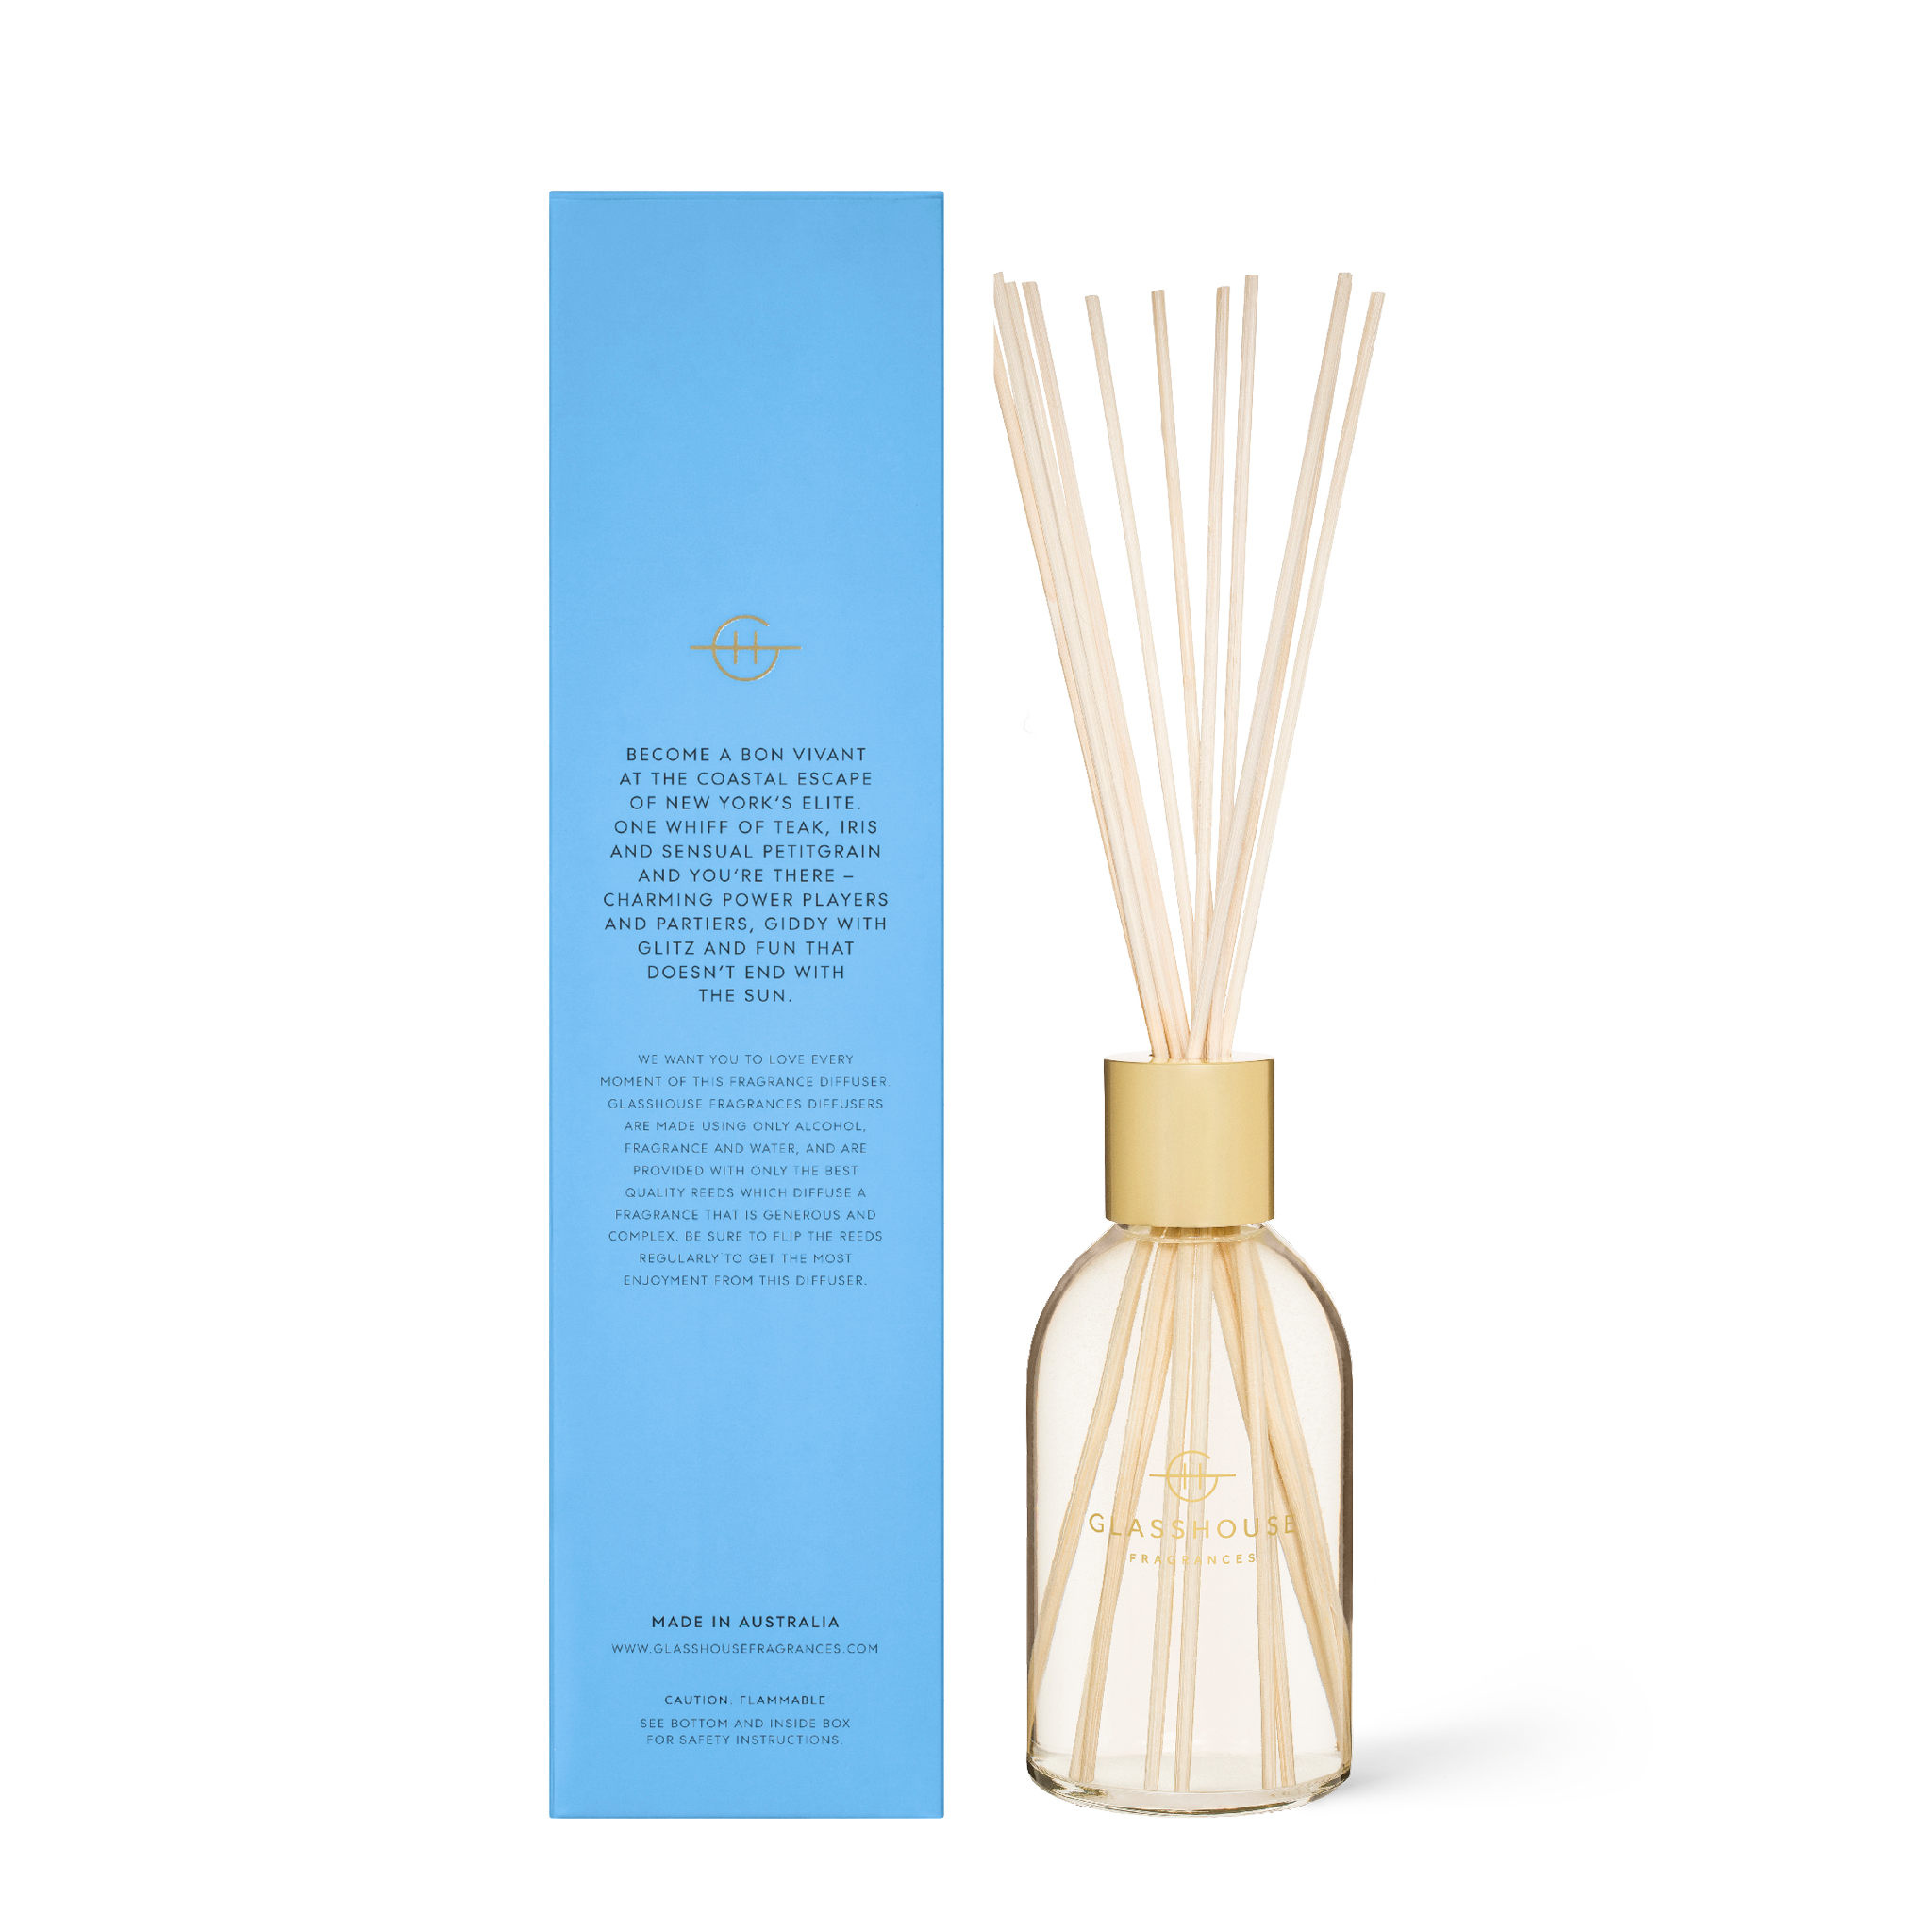 Glasshouse Fragrances The Hamptons Teak and Petitgrain 250mL Fragrance Diffuser with box - back of product shot